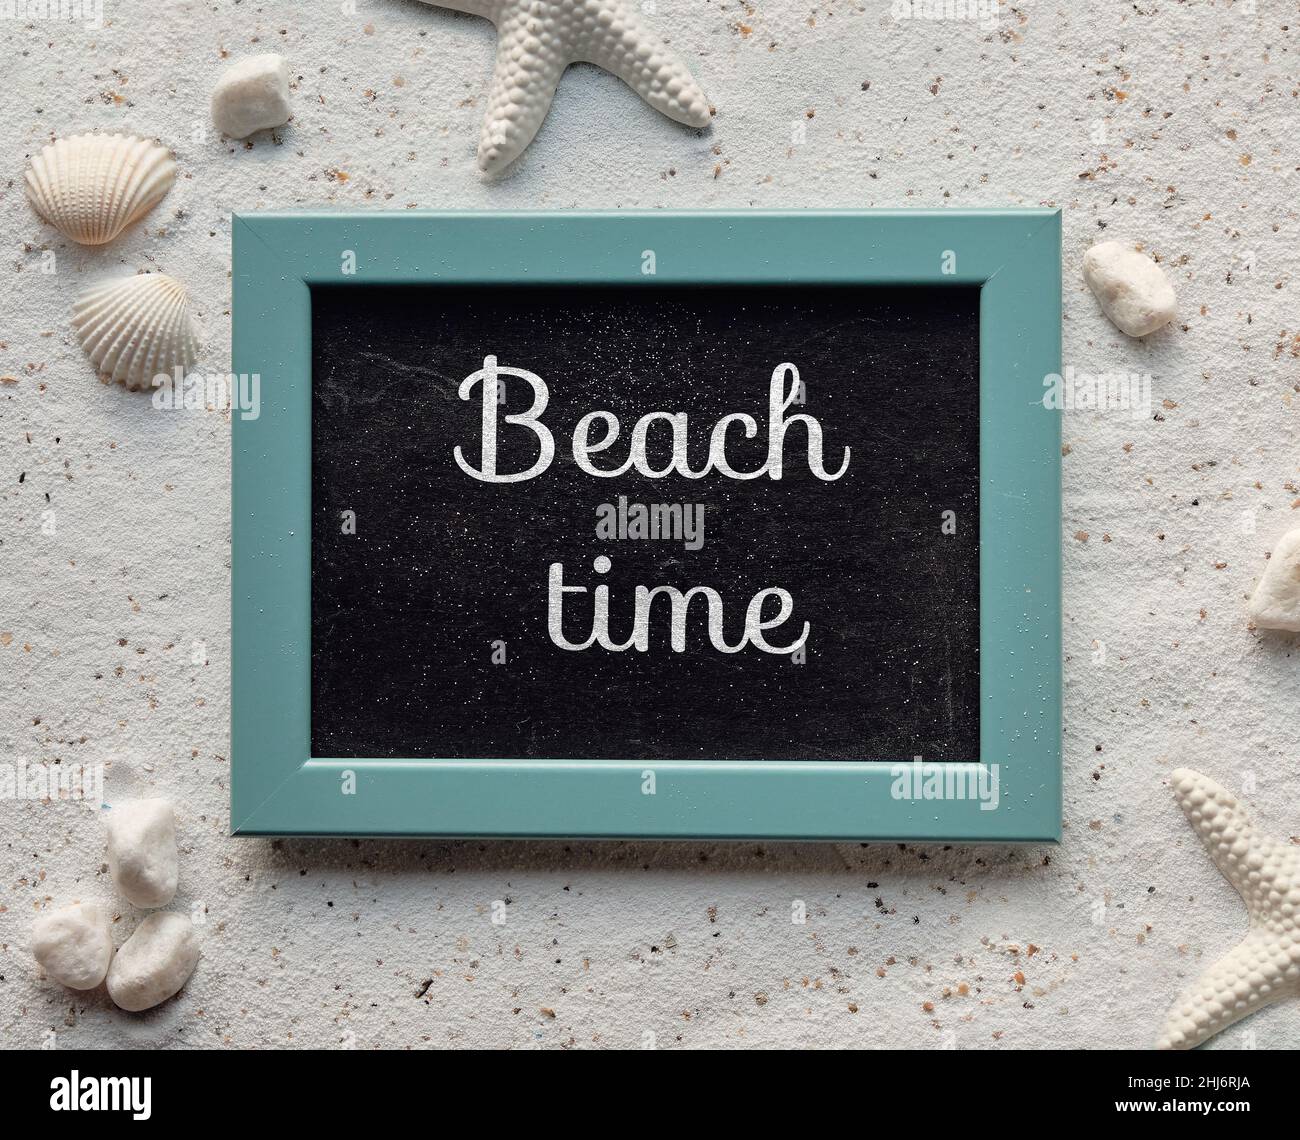 Beach time text on blackboard in mint green frame. Background with white sand with shells, starfish, Stock Photo